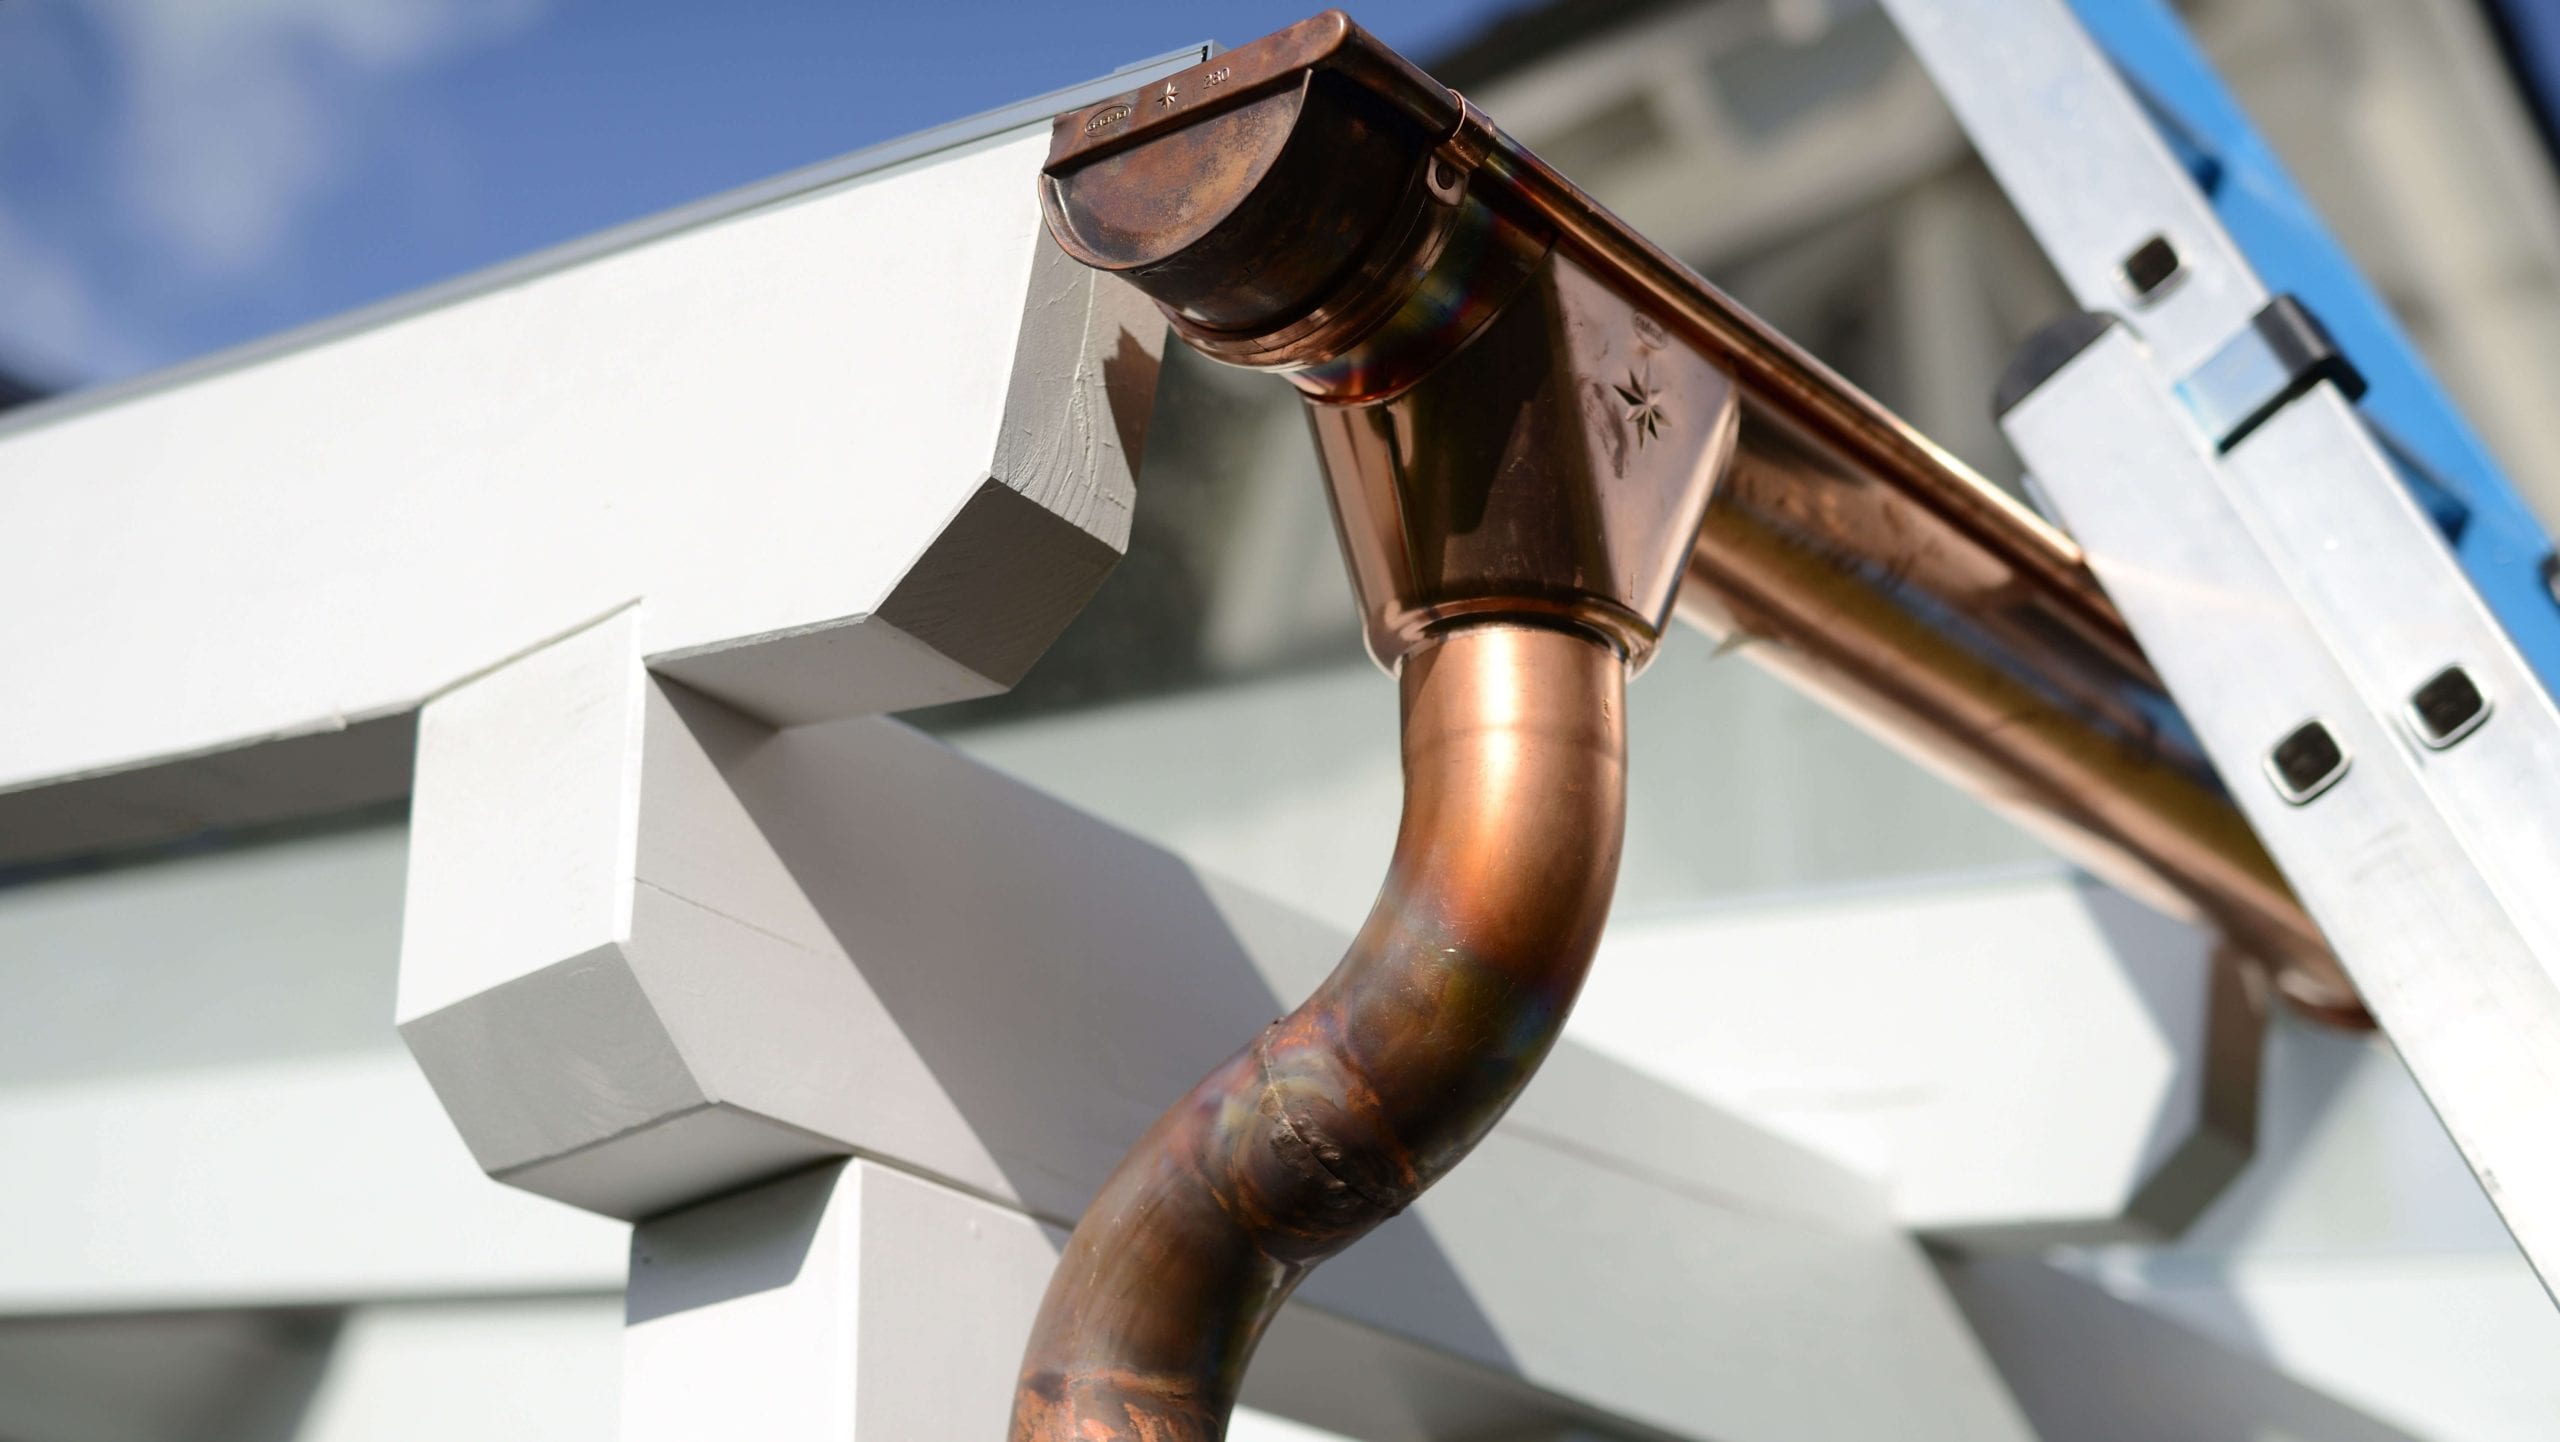 Make your property stand out with copper gutters. Contact for gutter installation in Hampton